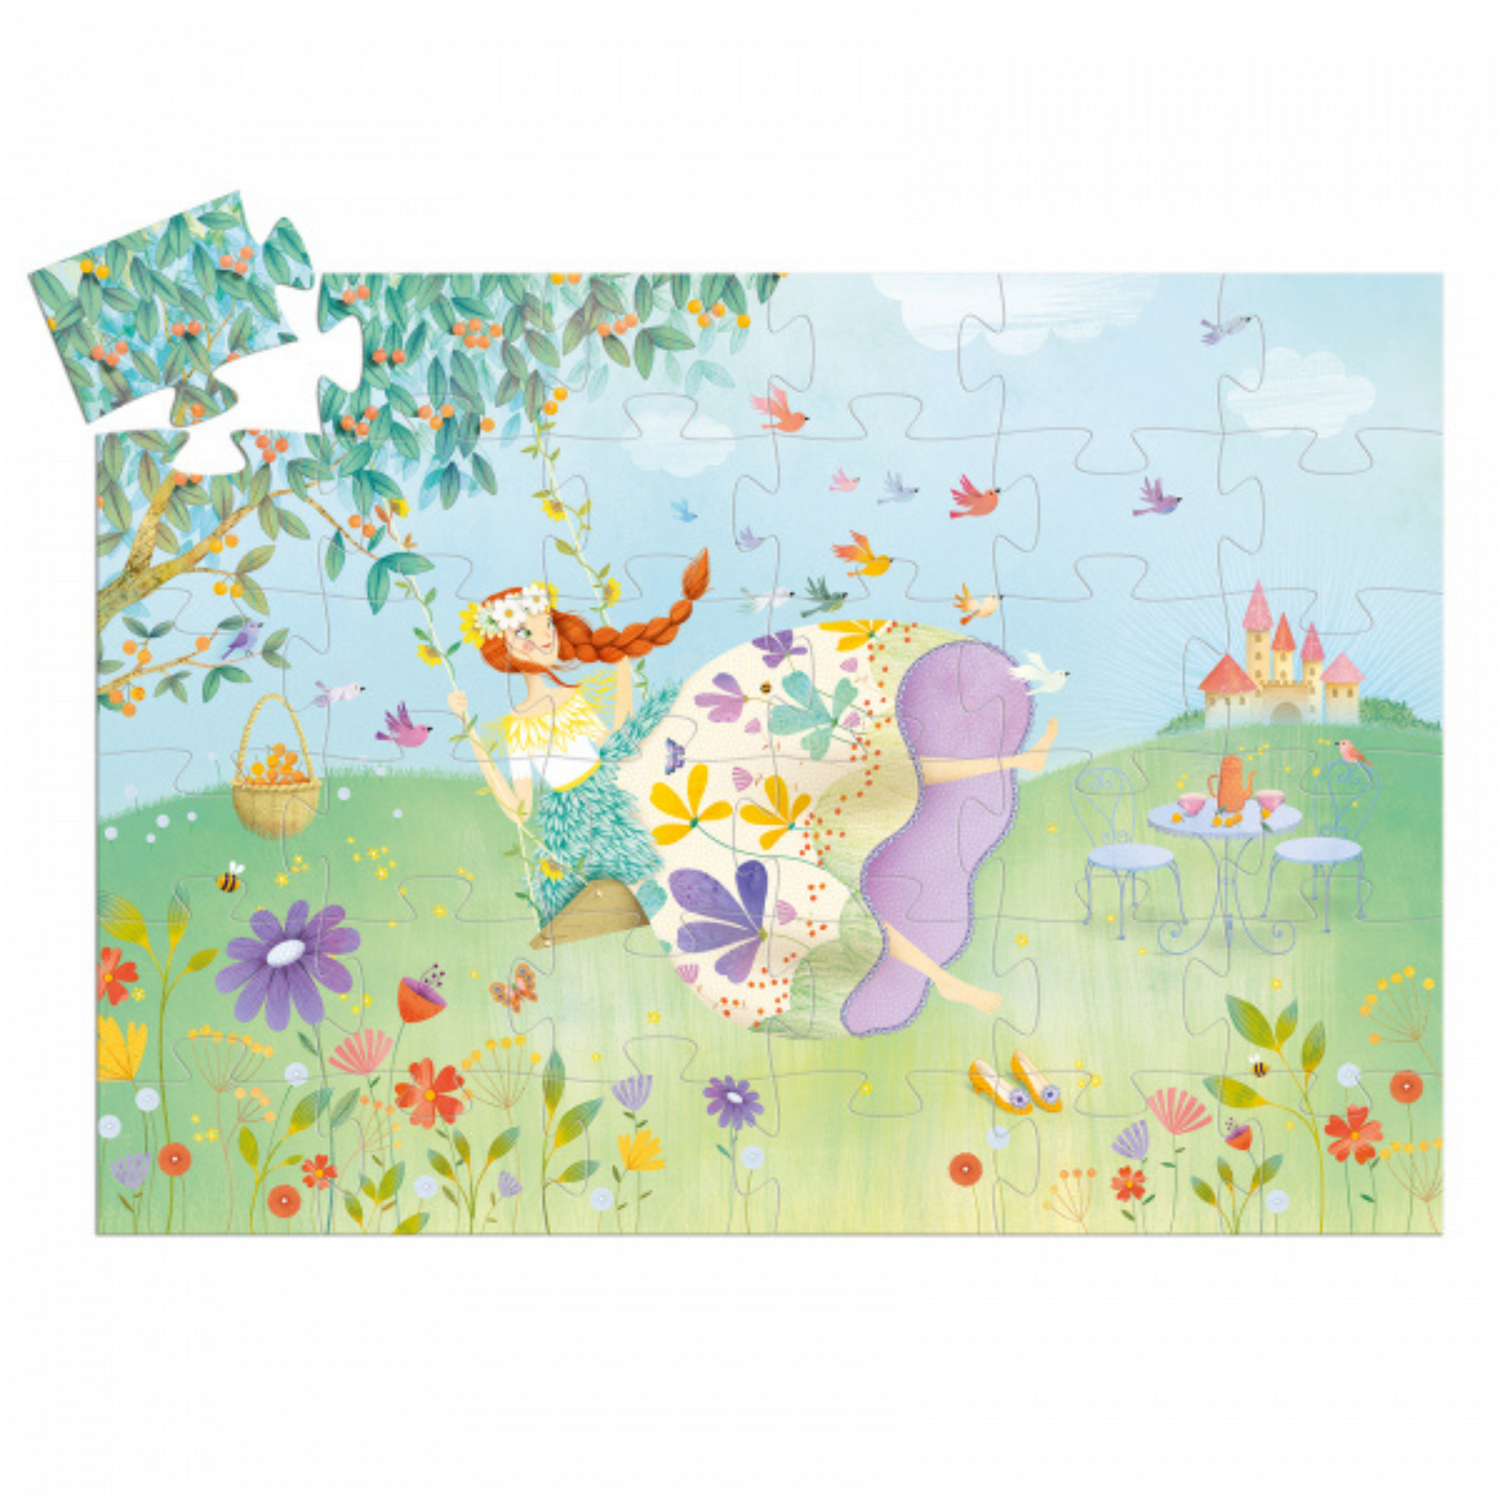 Djeco tactile puzzle - The fairy and the unicorn